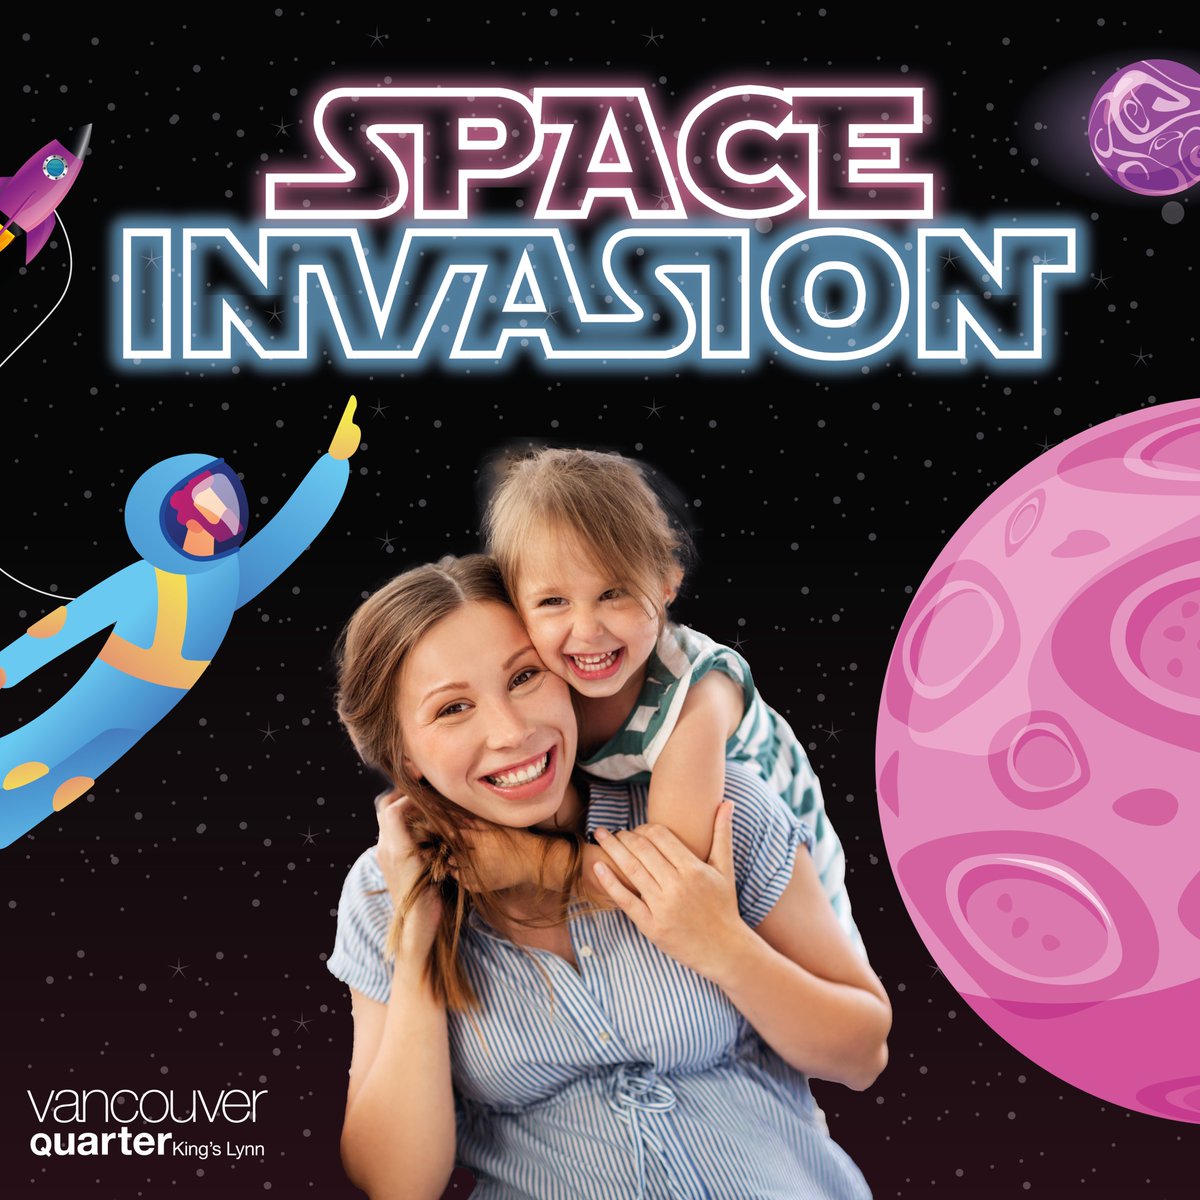 Join us TOMORROW for our FREE Space Invasion Event, 10am-3pm. Grab a selfie with Star Wars Characters, make a rocket wand, decorate a biscuit, say 'Cheese!' at our space theme photo shoot and much more! No need to book, just pop along to the old Game unit on Broad Street.